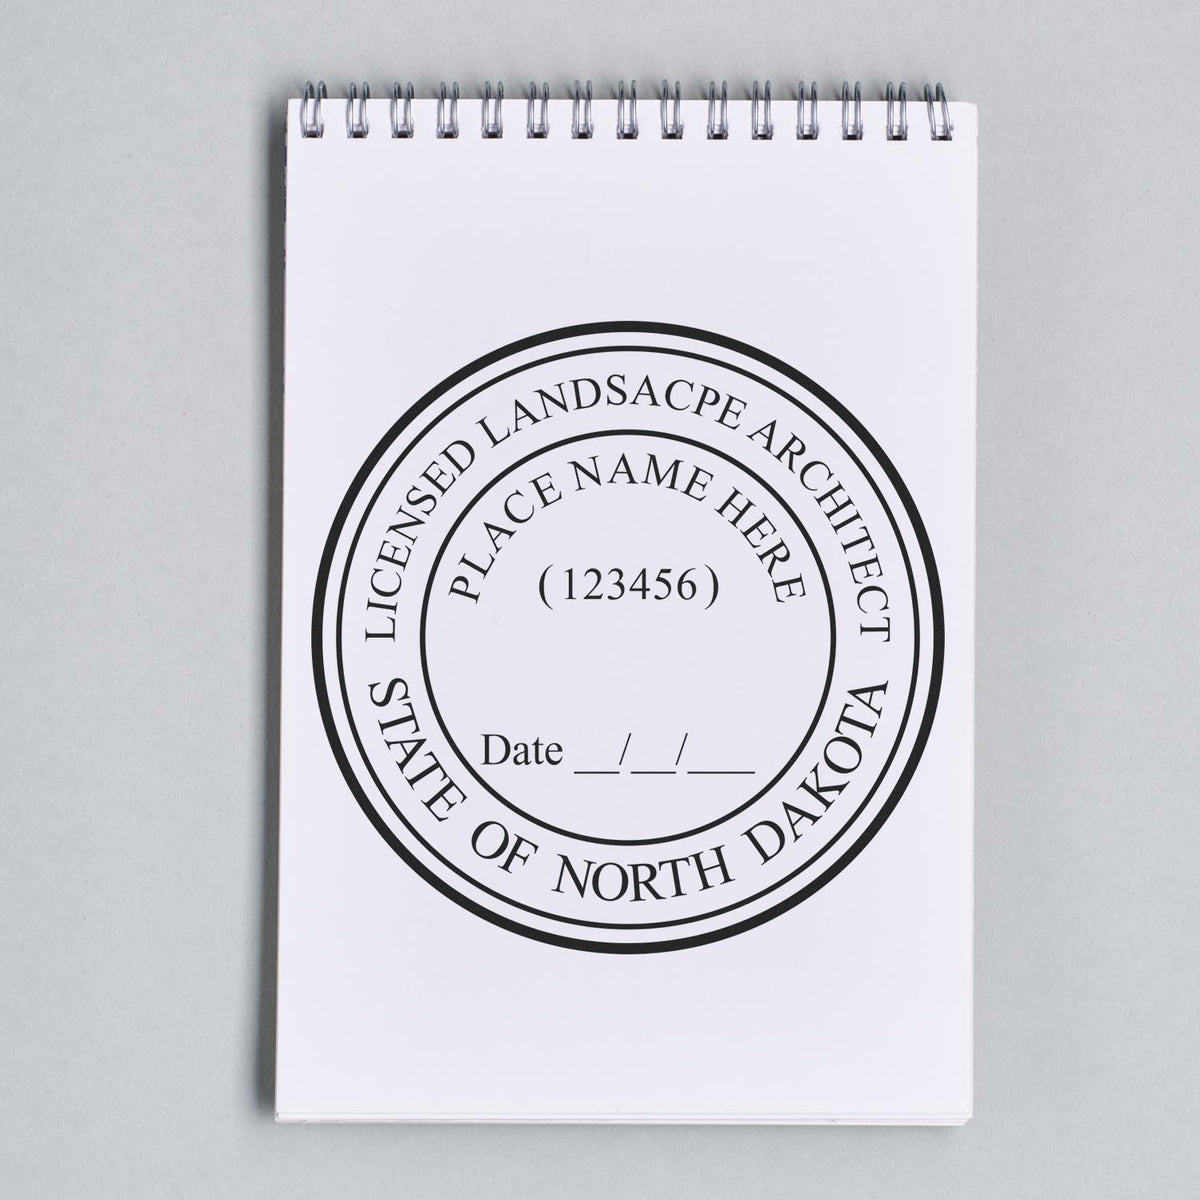 A stamped impression of the Digital North Dakota Landscape Architect Stamp in this stylish lifestyle photo, setting the tone for a unique and personalized product.